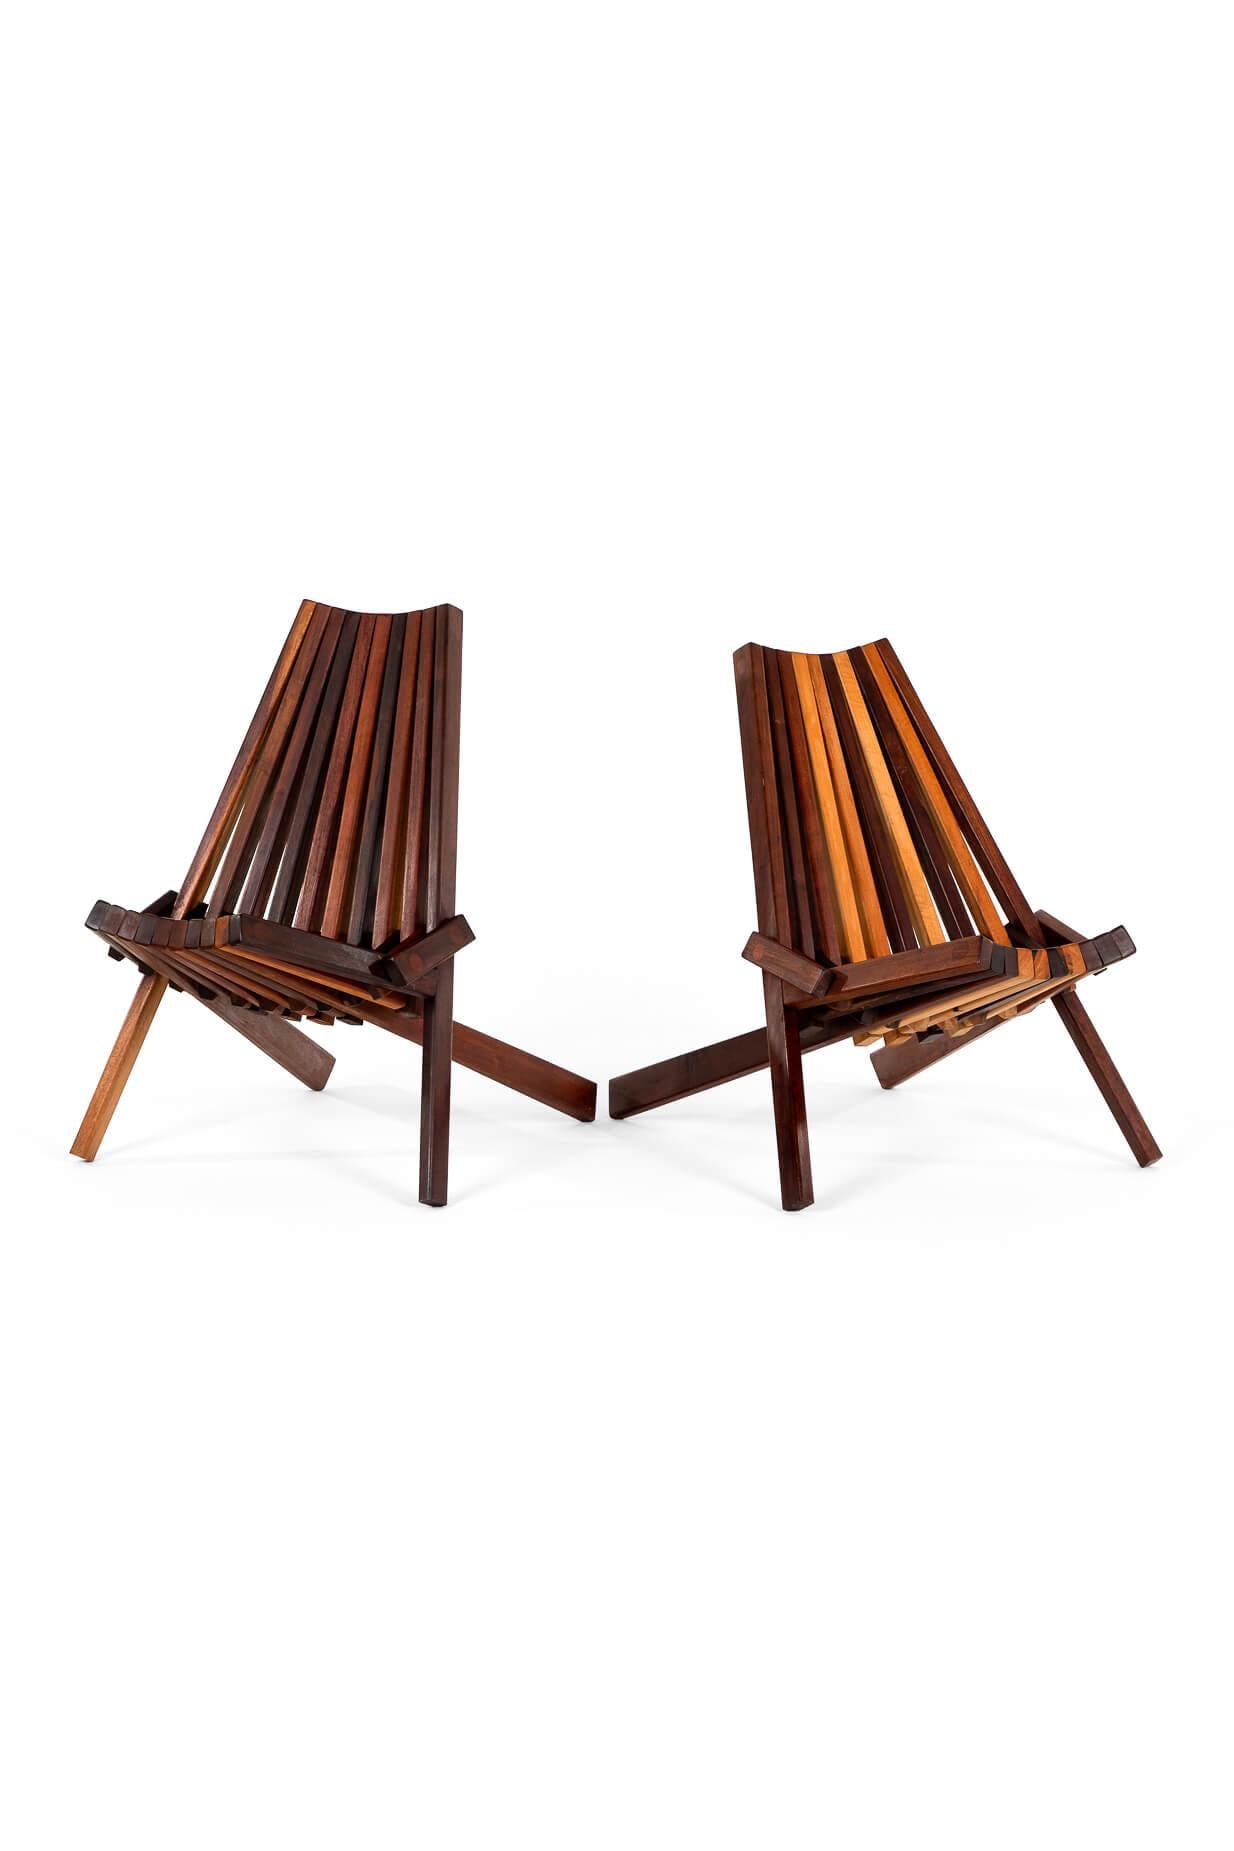 A striking pair of low profile folding chairs in teak perfect for both inside and outside use.

This original design pair of chairs are expertly constructed and very comfortable to sit in.

The chairs will add style to any setting they are placed